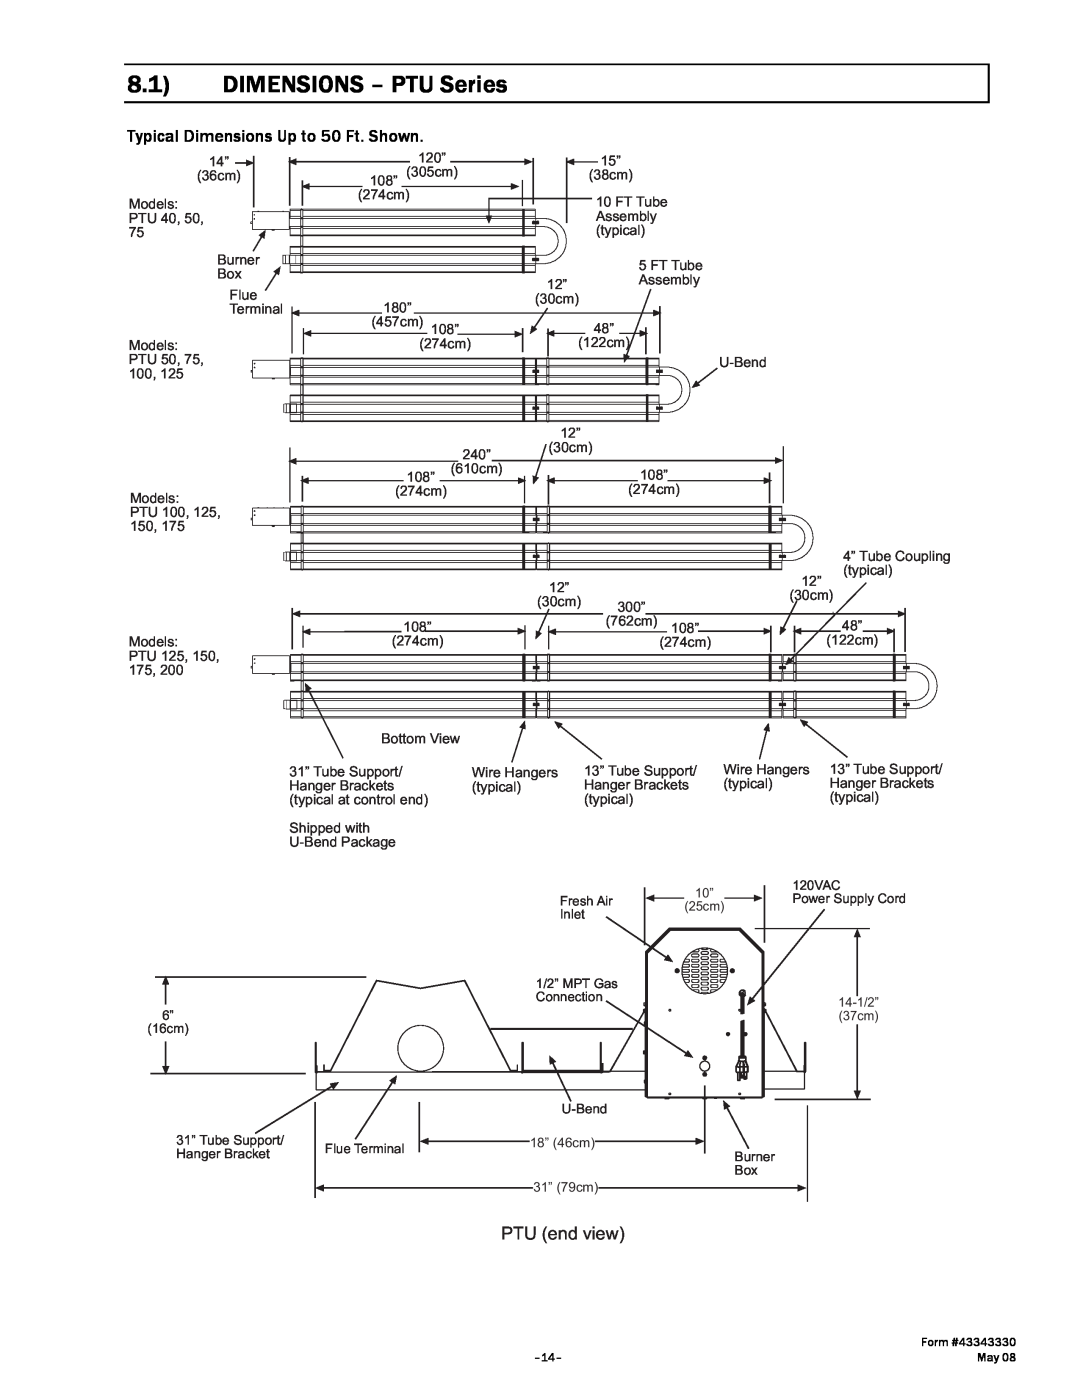 Gas-Fired Products PTS Series manual DIMENSIONS - PTU Series, PTU end view 